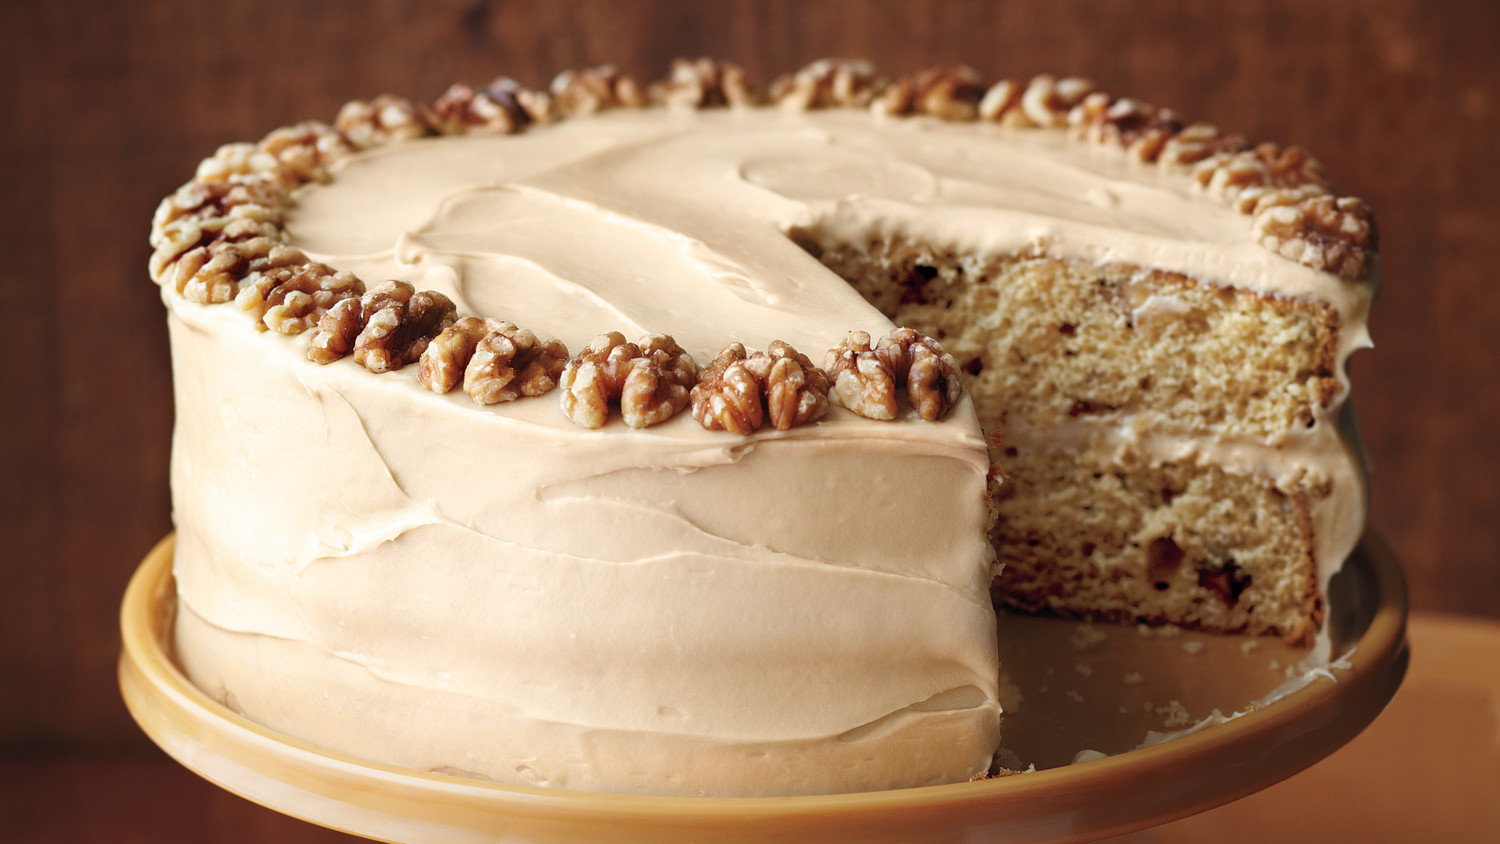 maple-walnut cake with brown-sugar frosting